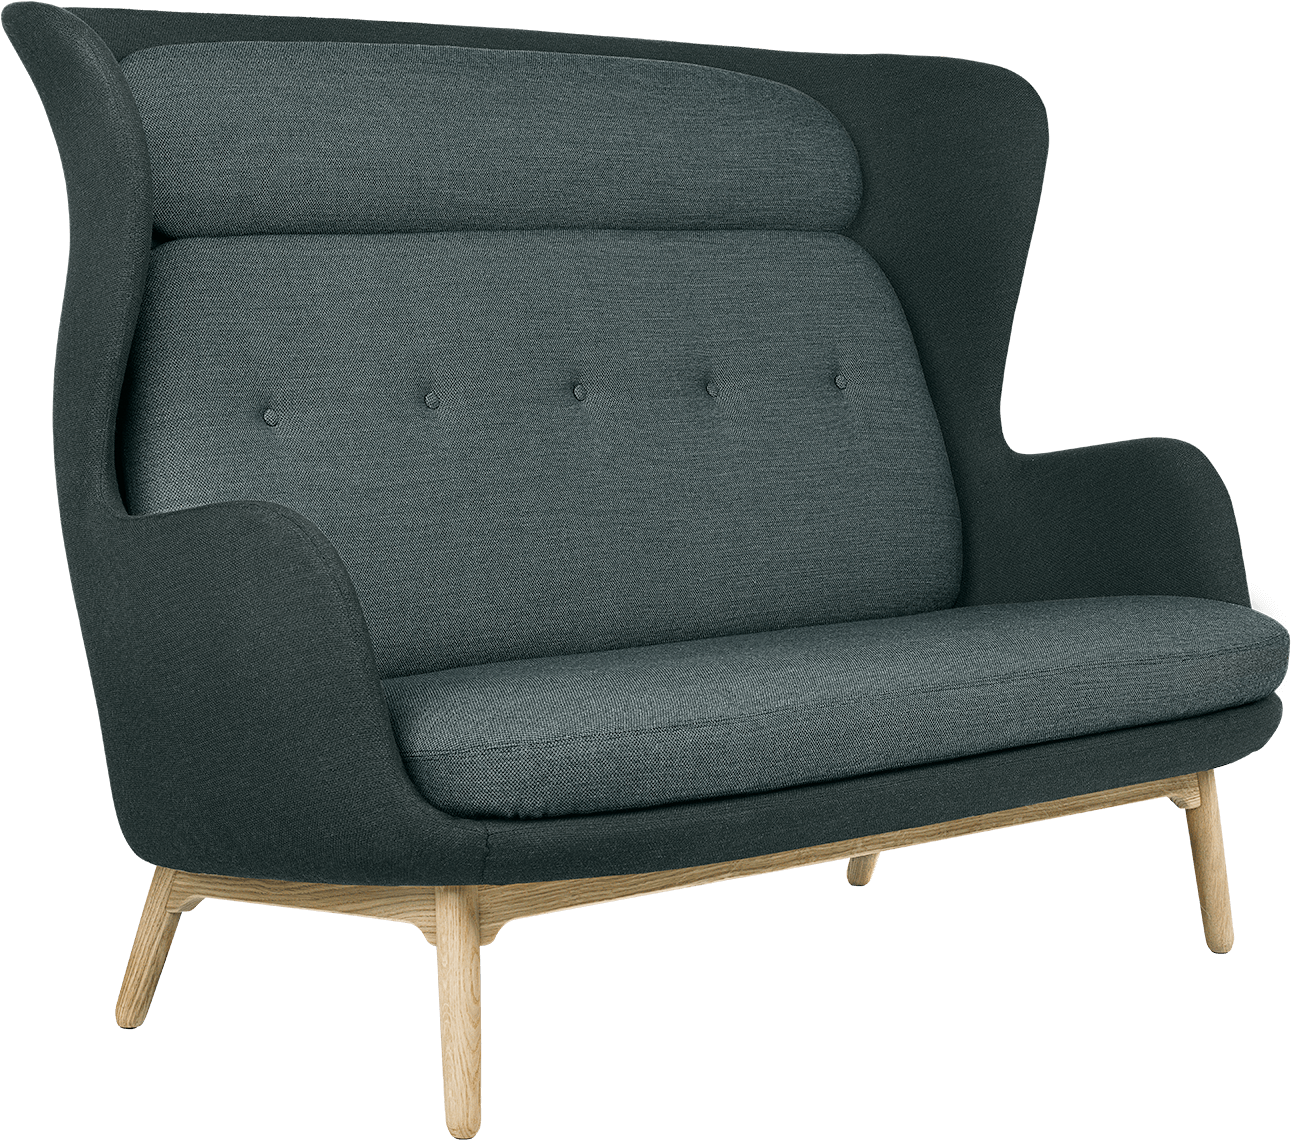 Modern Charcoal Sofawith Wooden Legs.png